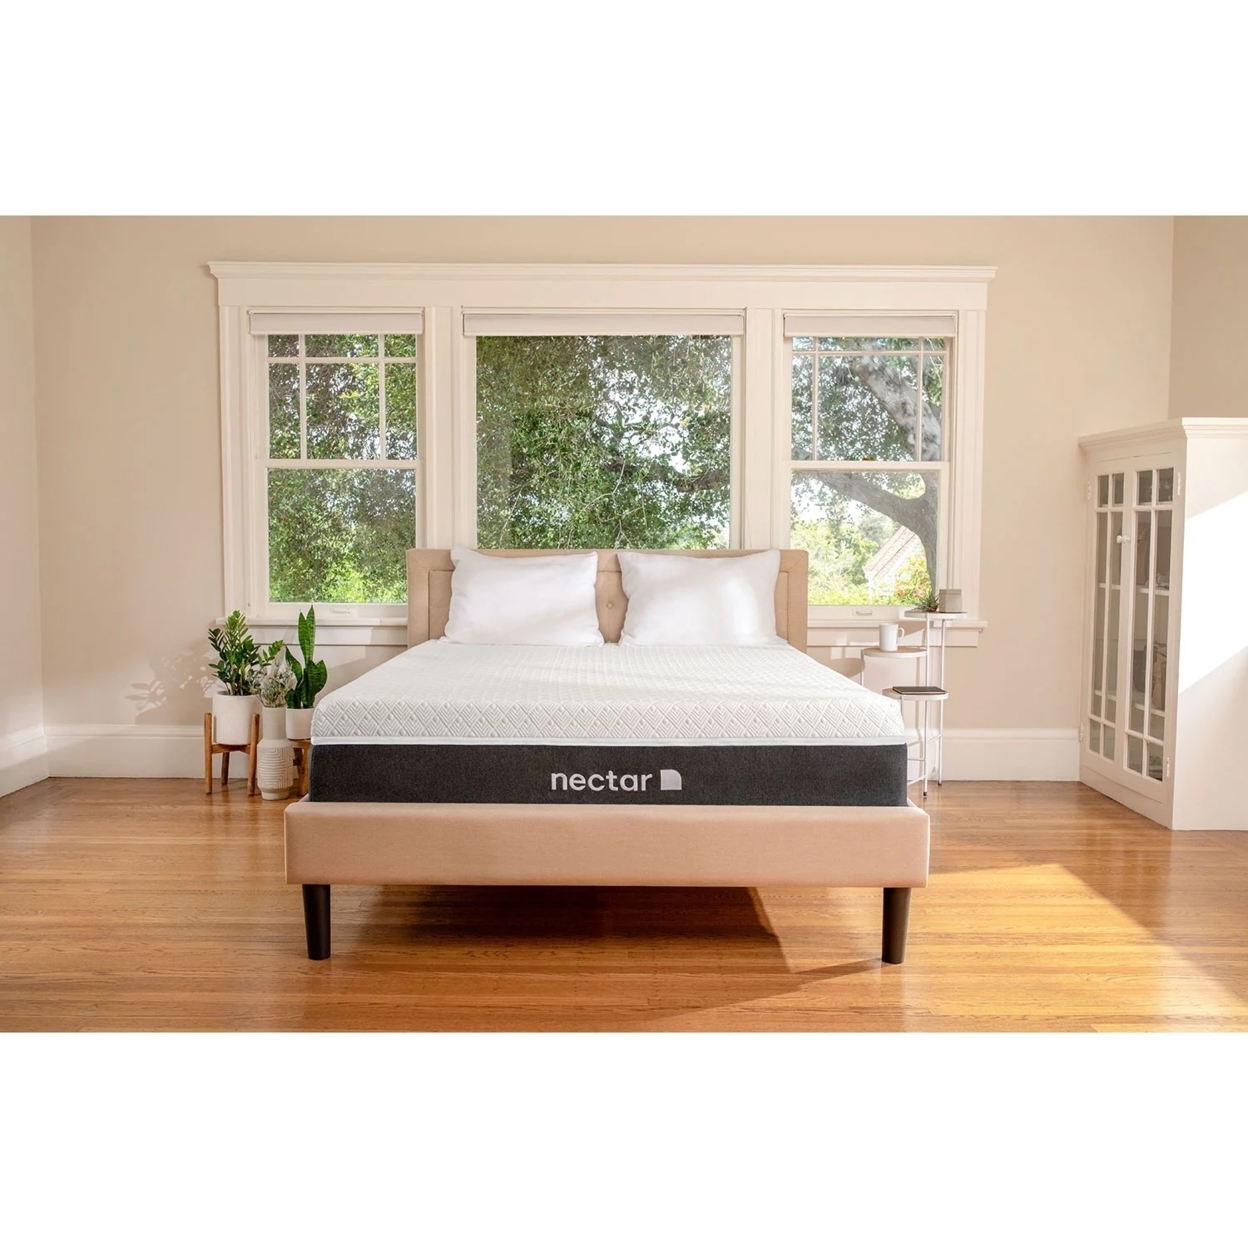 Nectar 12 Mattress With Gel Memory Foam And New Active Cooling Technology, King